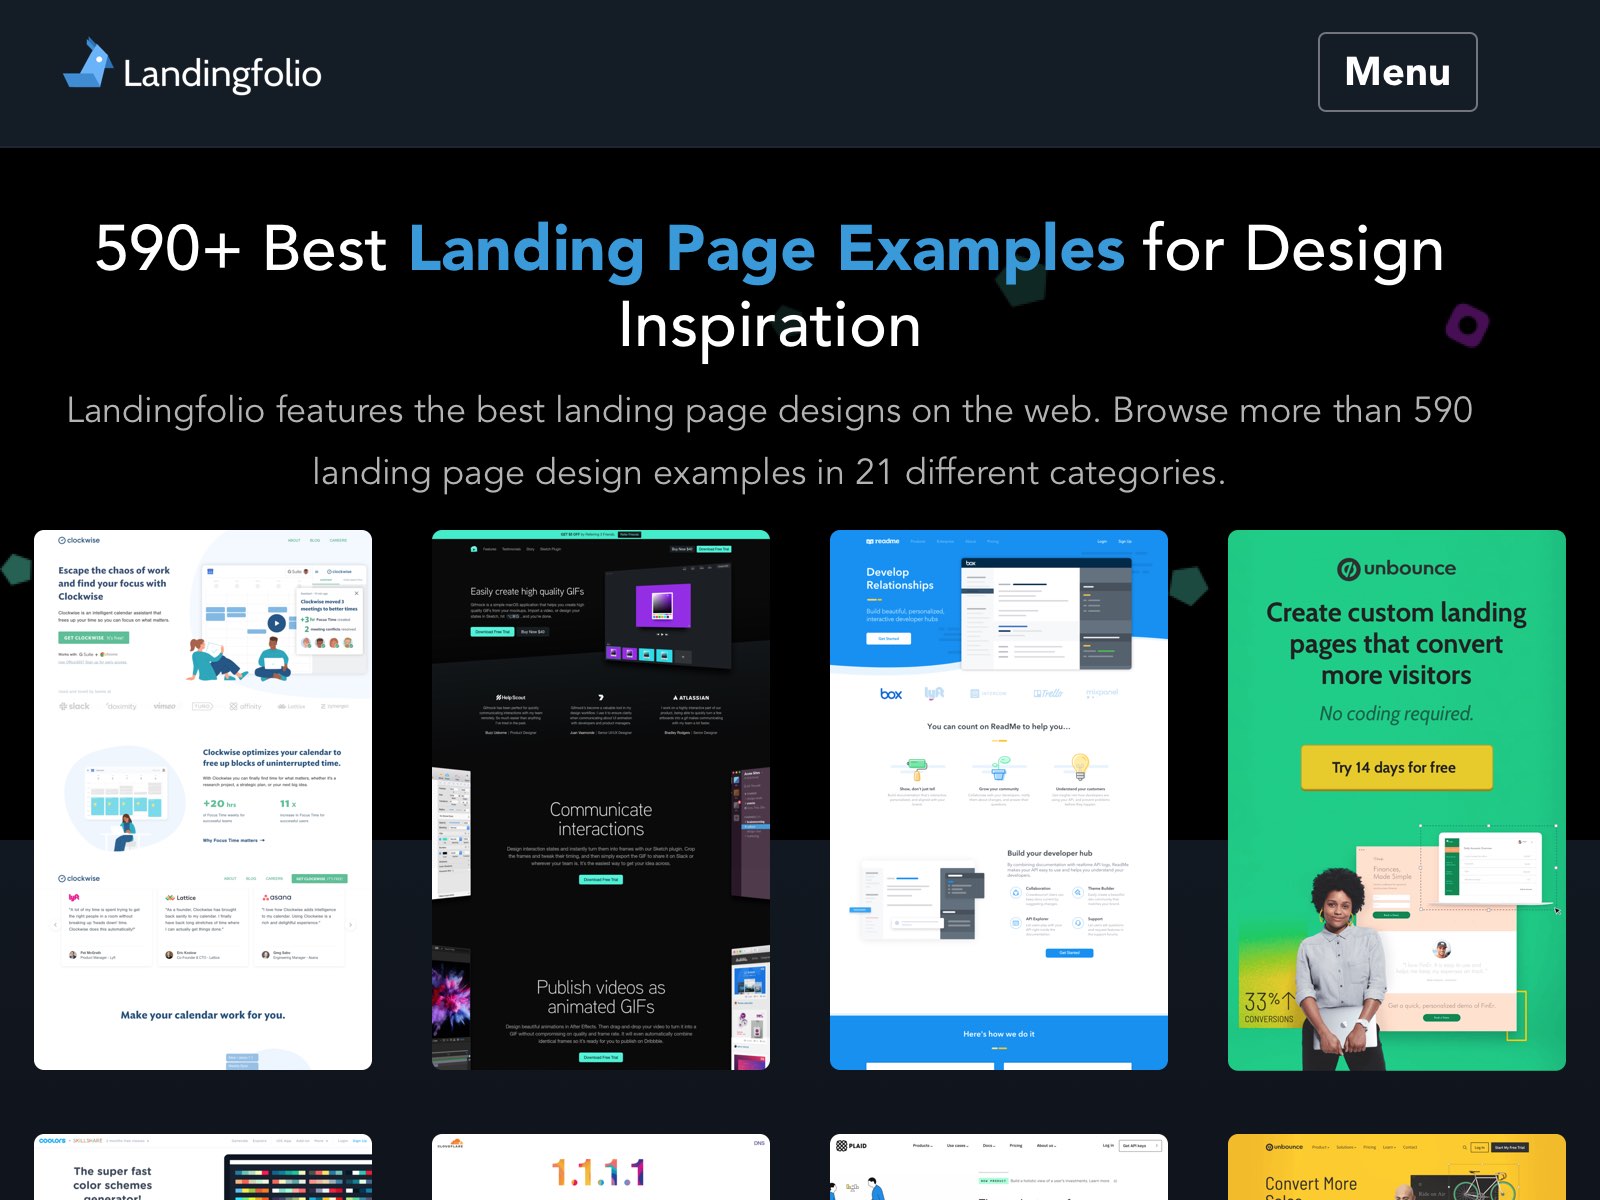 Landingfolio features the best landing page designs on the web. Get inspiration from more than 461+ landing page design examples, updated weekly.